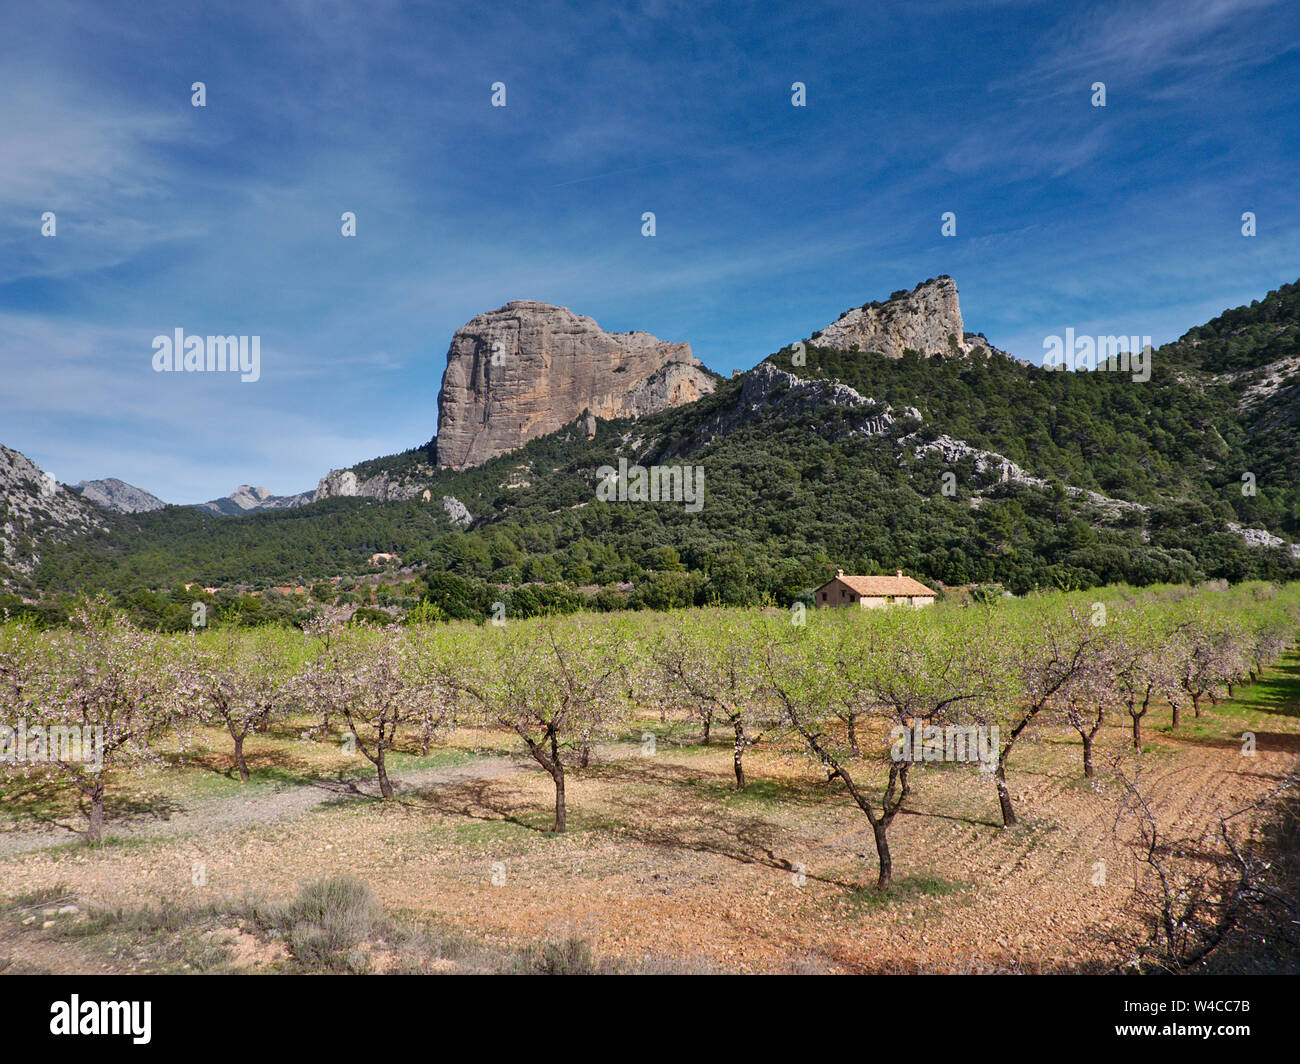 Views of the natural park dels ports with some flowering trees and spectacular rocks Stock Photo